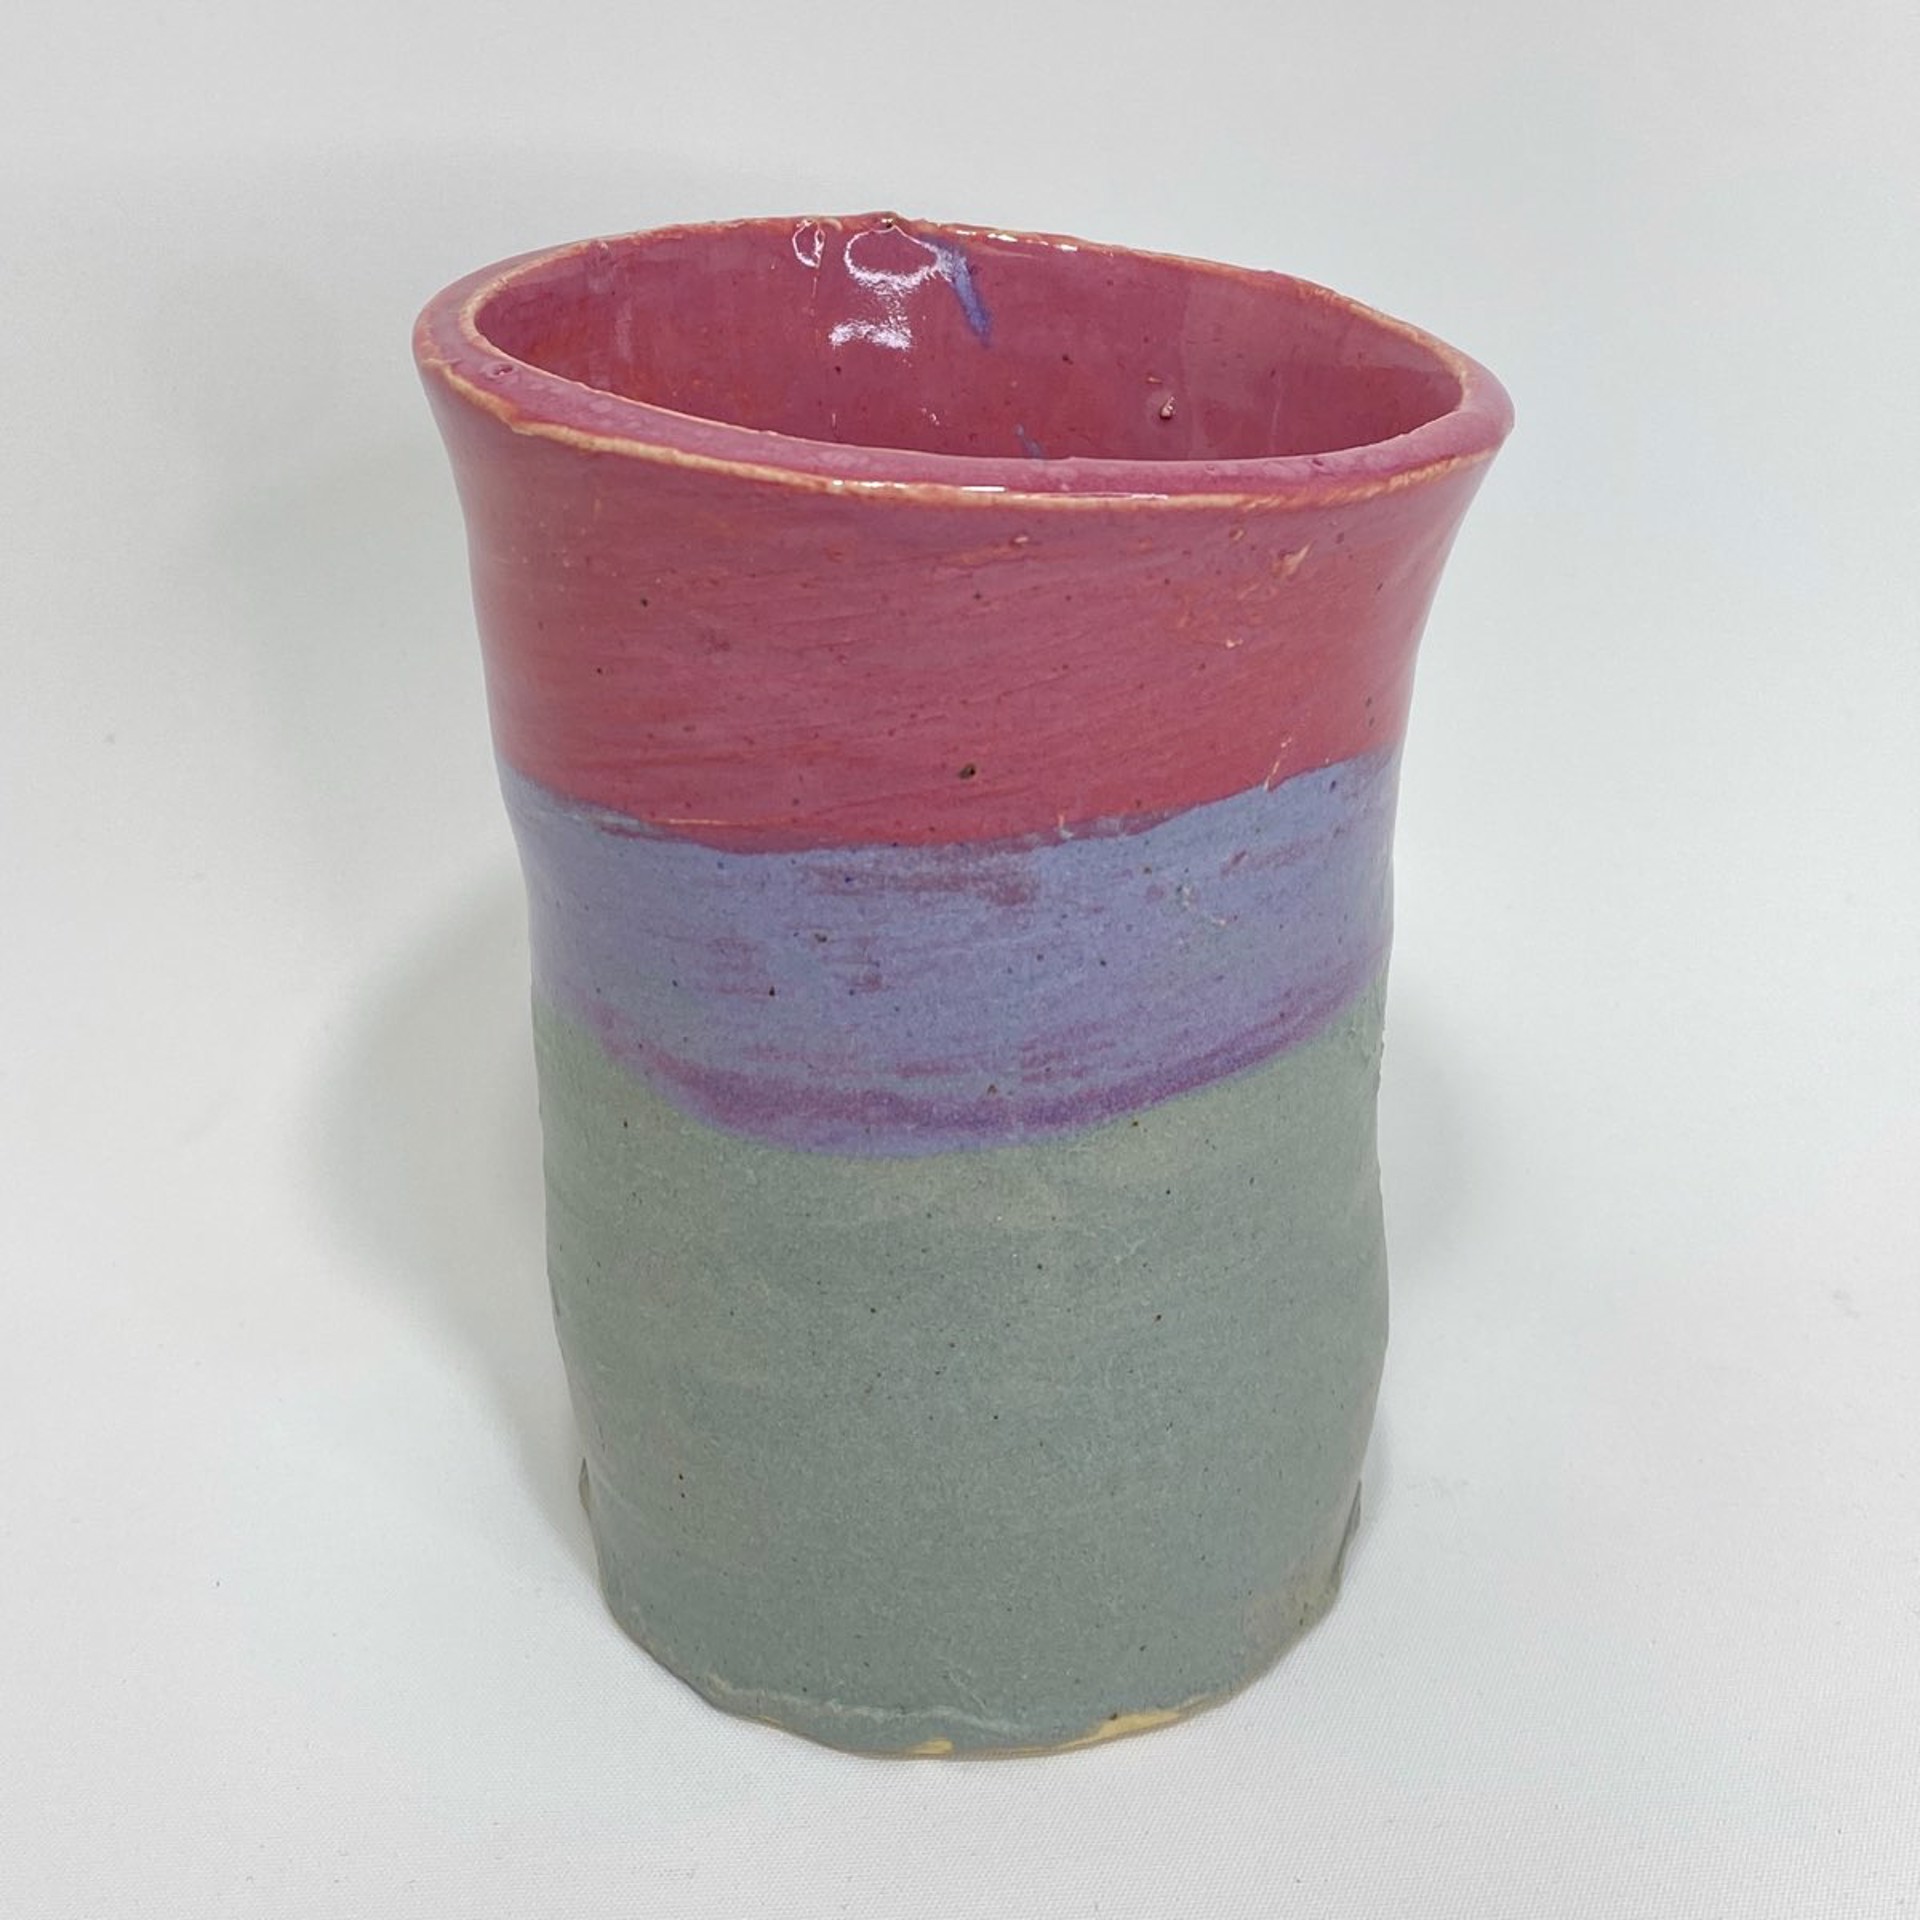 "Pink, Purple, & Gray Vase" by Justin S. by One Step Beyond